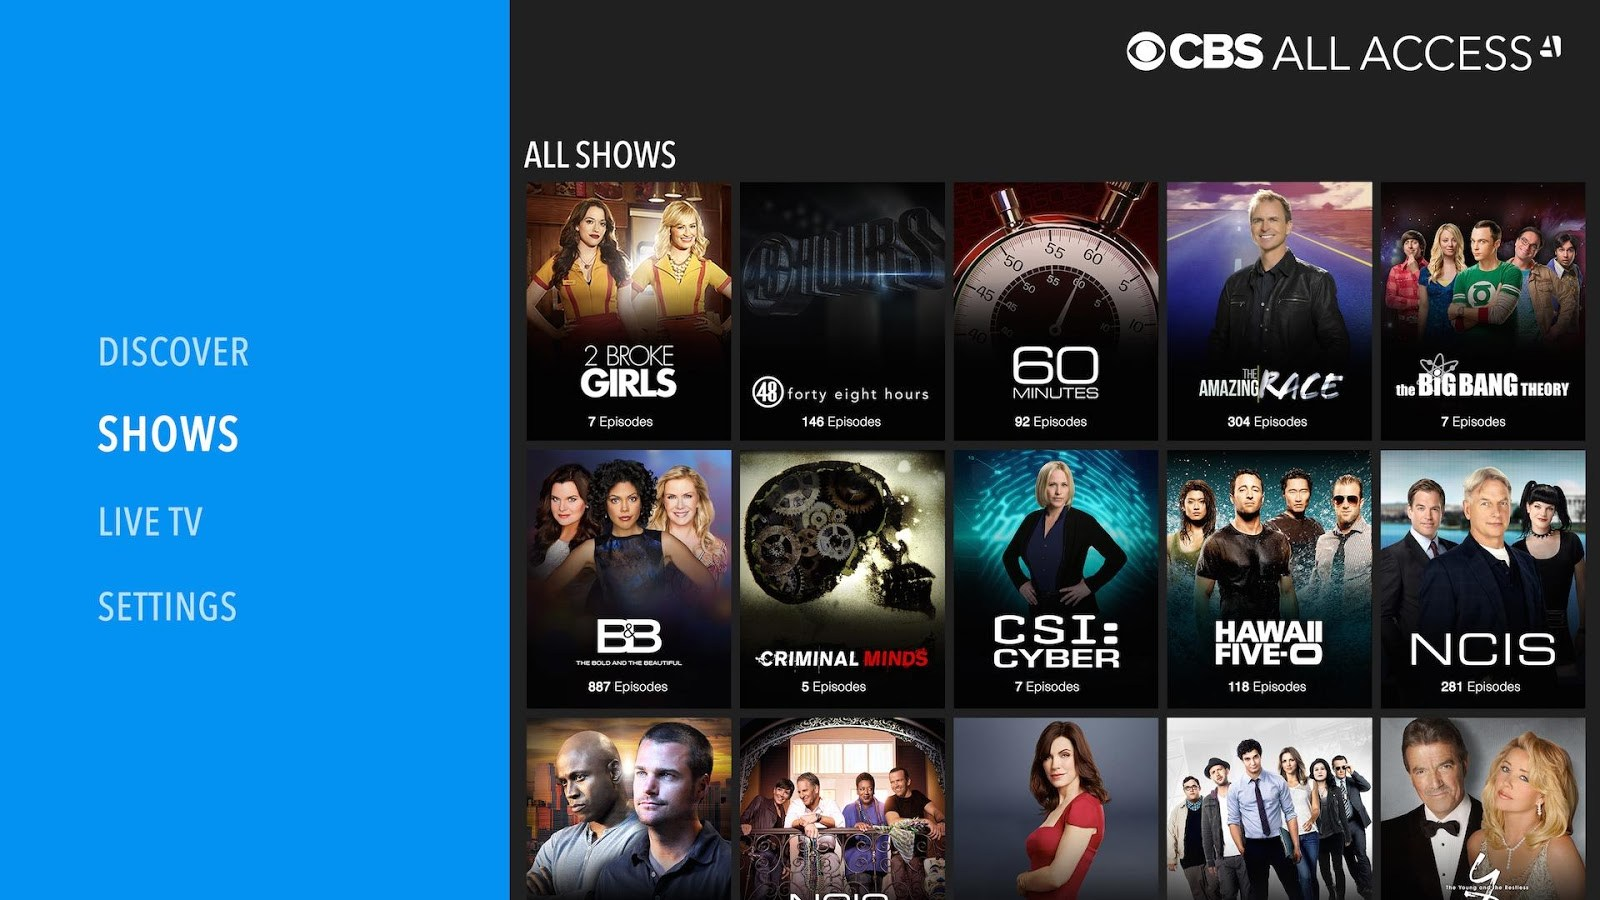 Photo: CBS All Access Homepage 